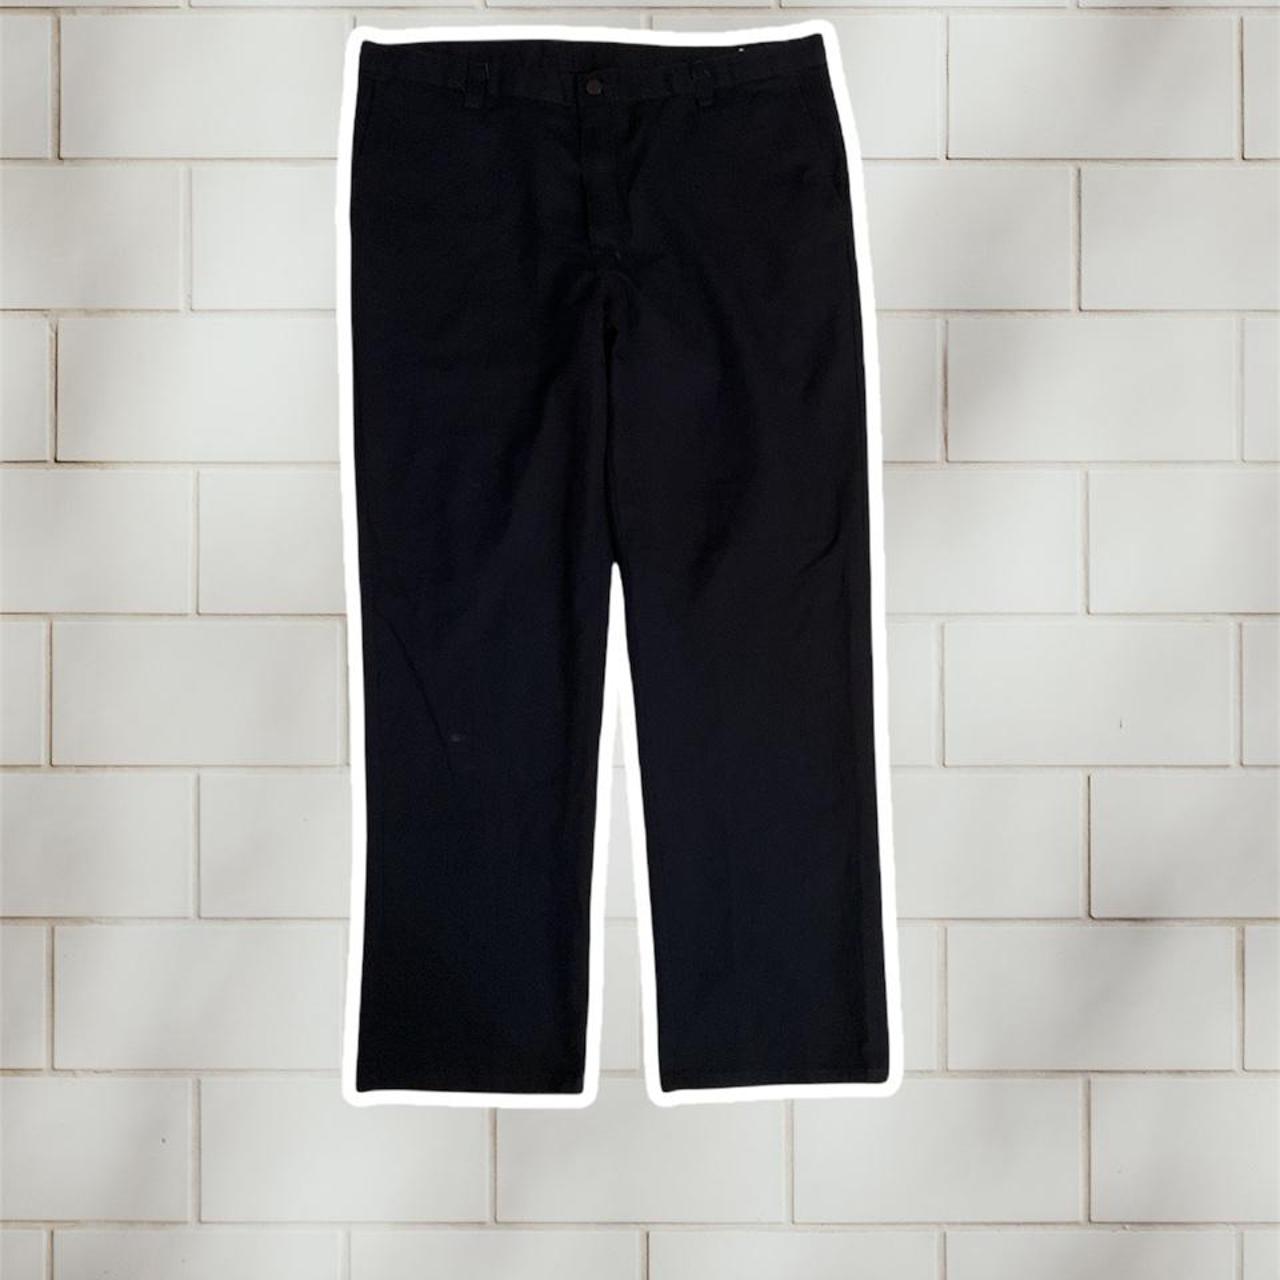 Product Image 2 - Dickies vintage workwear trousers.

Great condition,